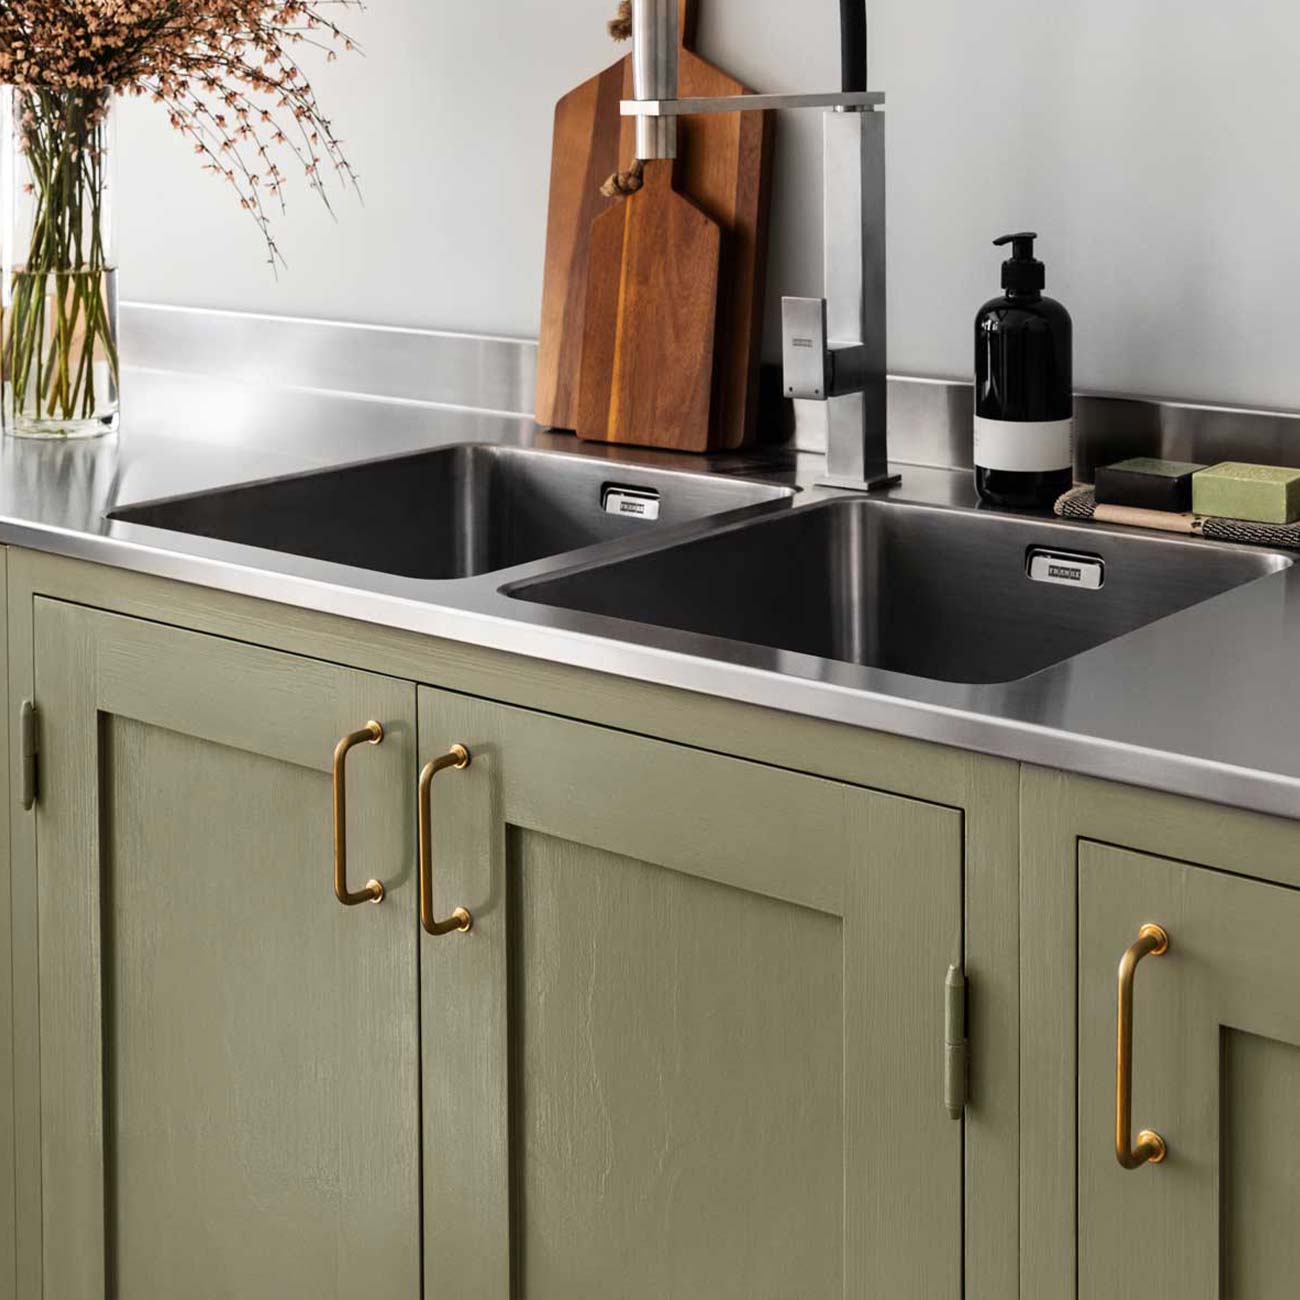 Which handles fit best in your kitchen?